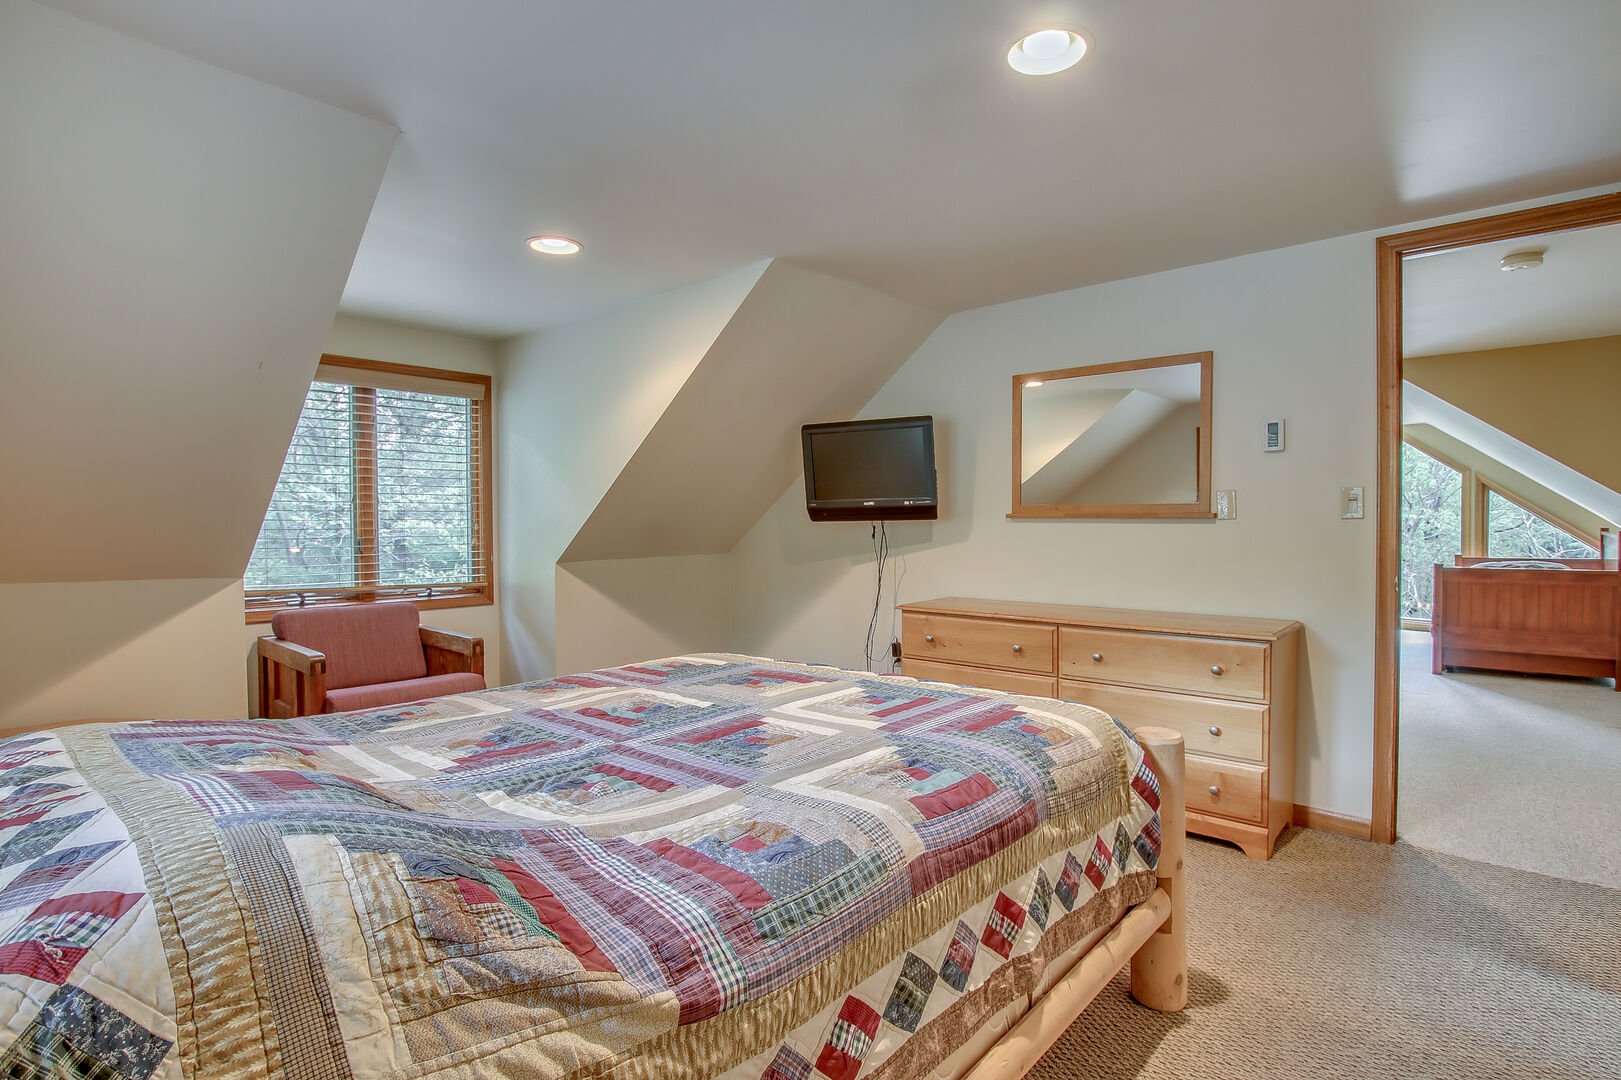 Another shot of the master bedroom of this Pocono rental in Towanmensing Trails, with a bed, armchair, dresser, TV and Mirror in shot. The door opens to upper floor.